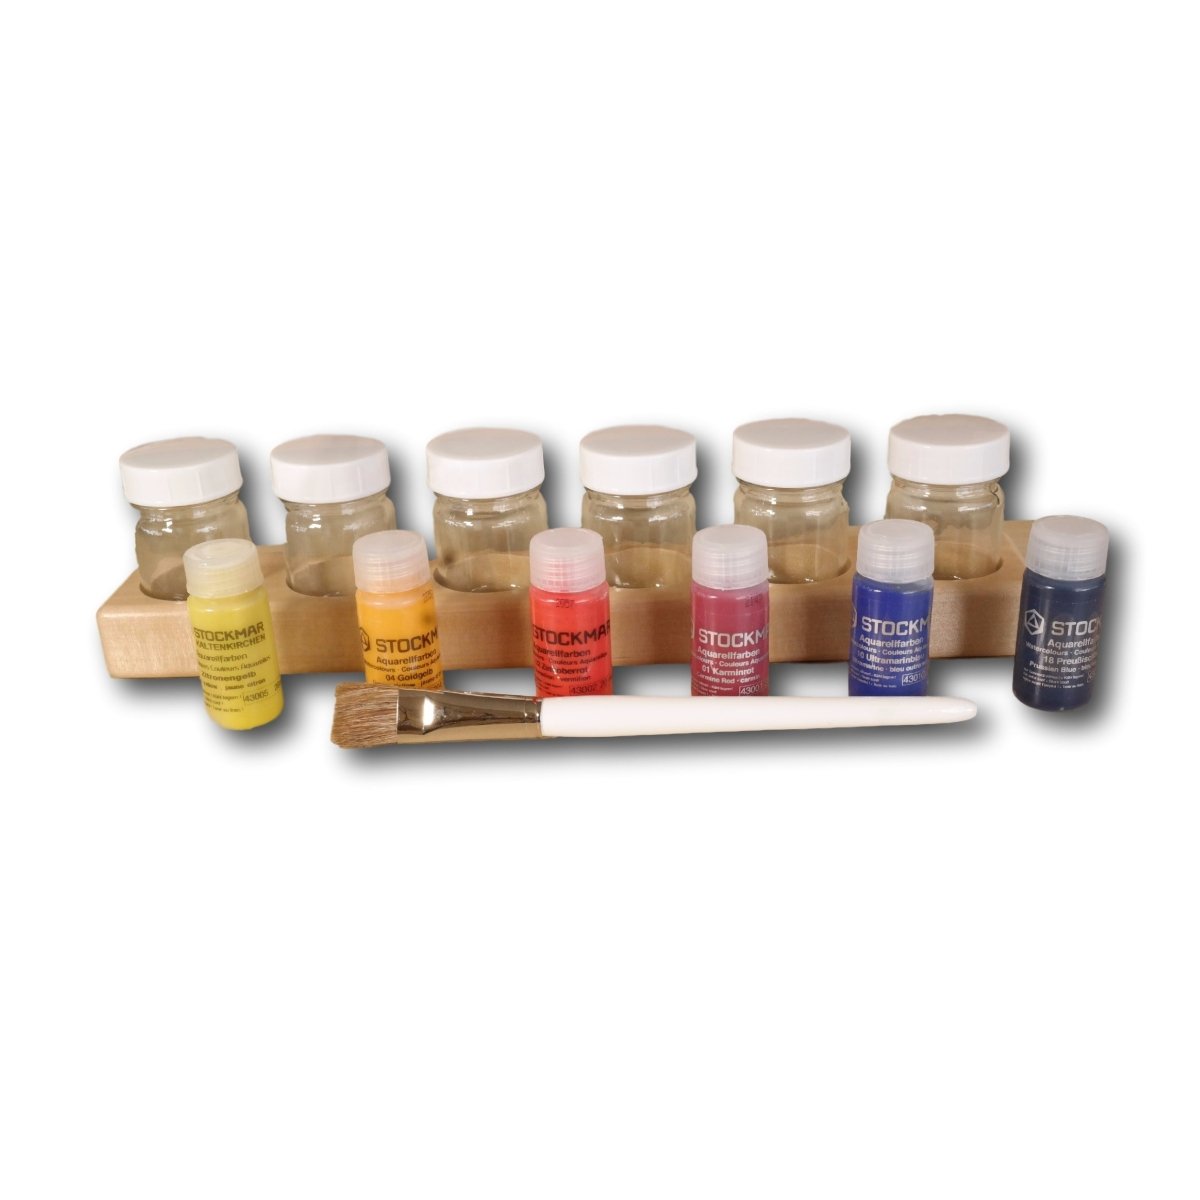 6 Jar Paint Holder with Stockmar Waterpaint and Paint Brush - Challenge & Fun, Inc.-NGL25915-P-1